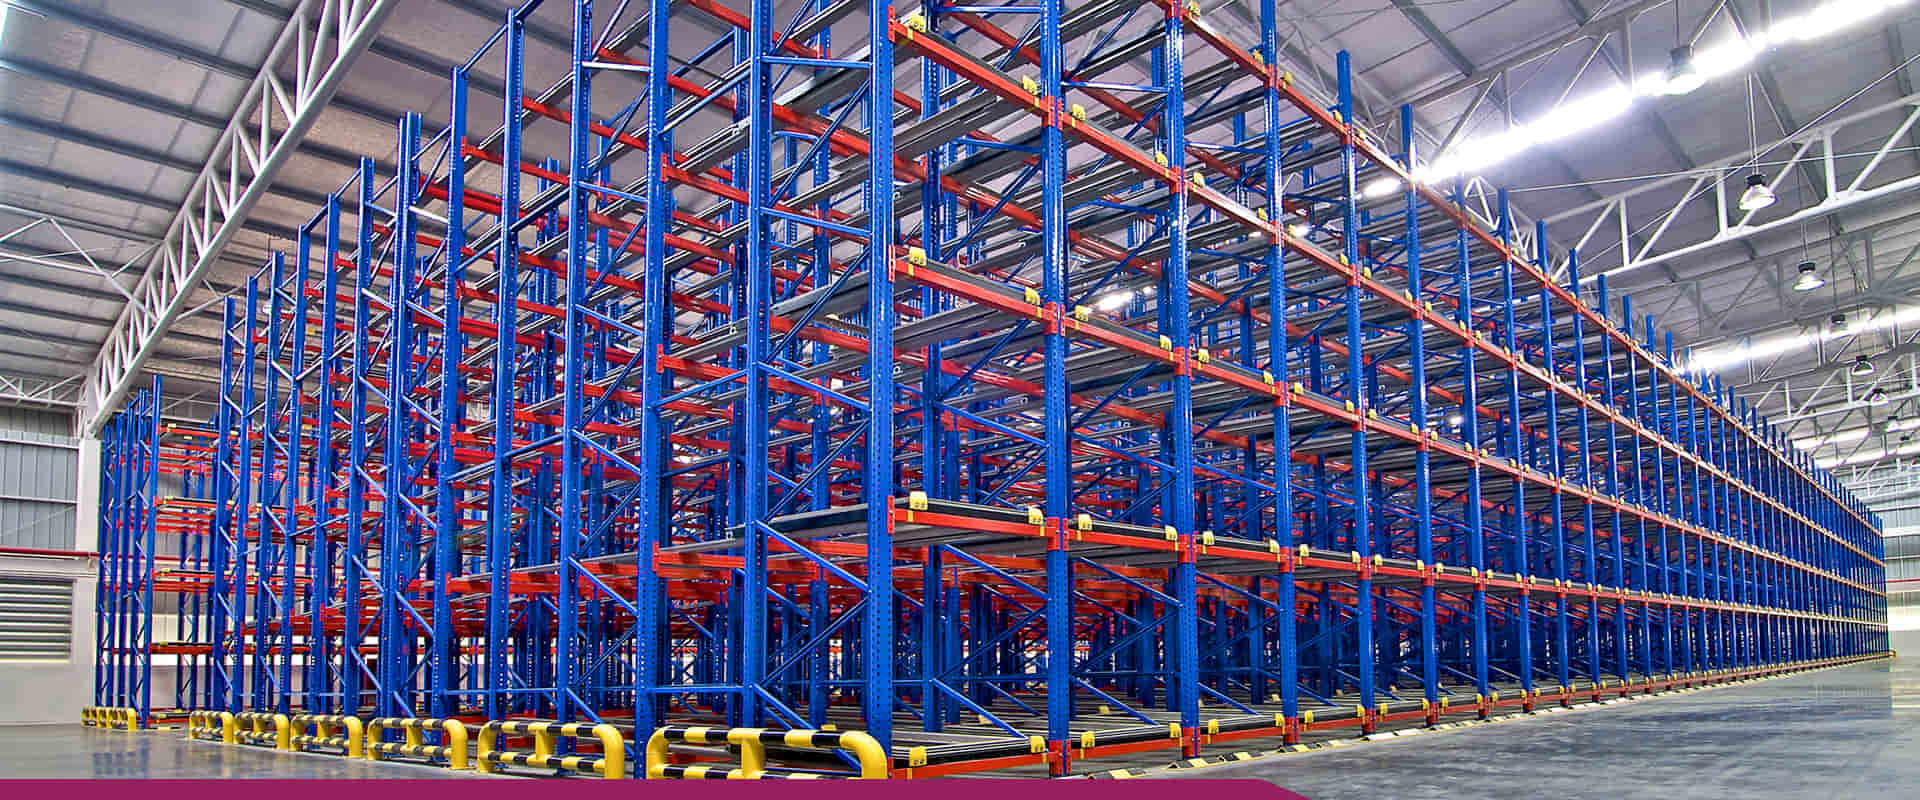 India’s Top Warehouse And Industrial Storage Racks Manufacturer In Bhari